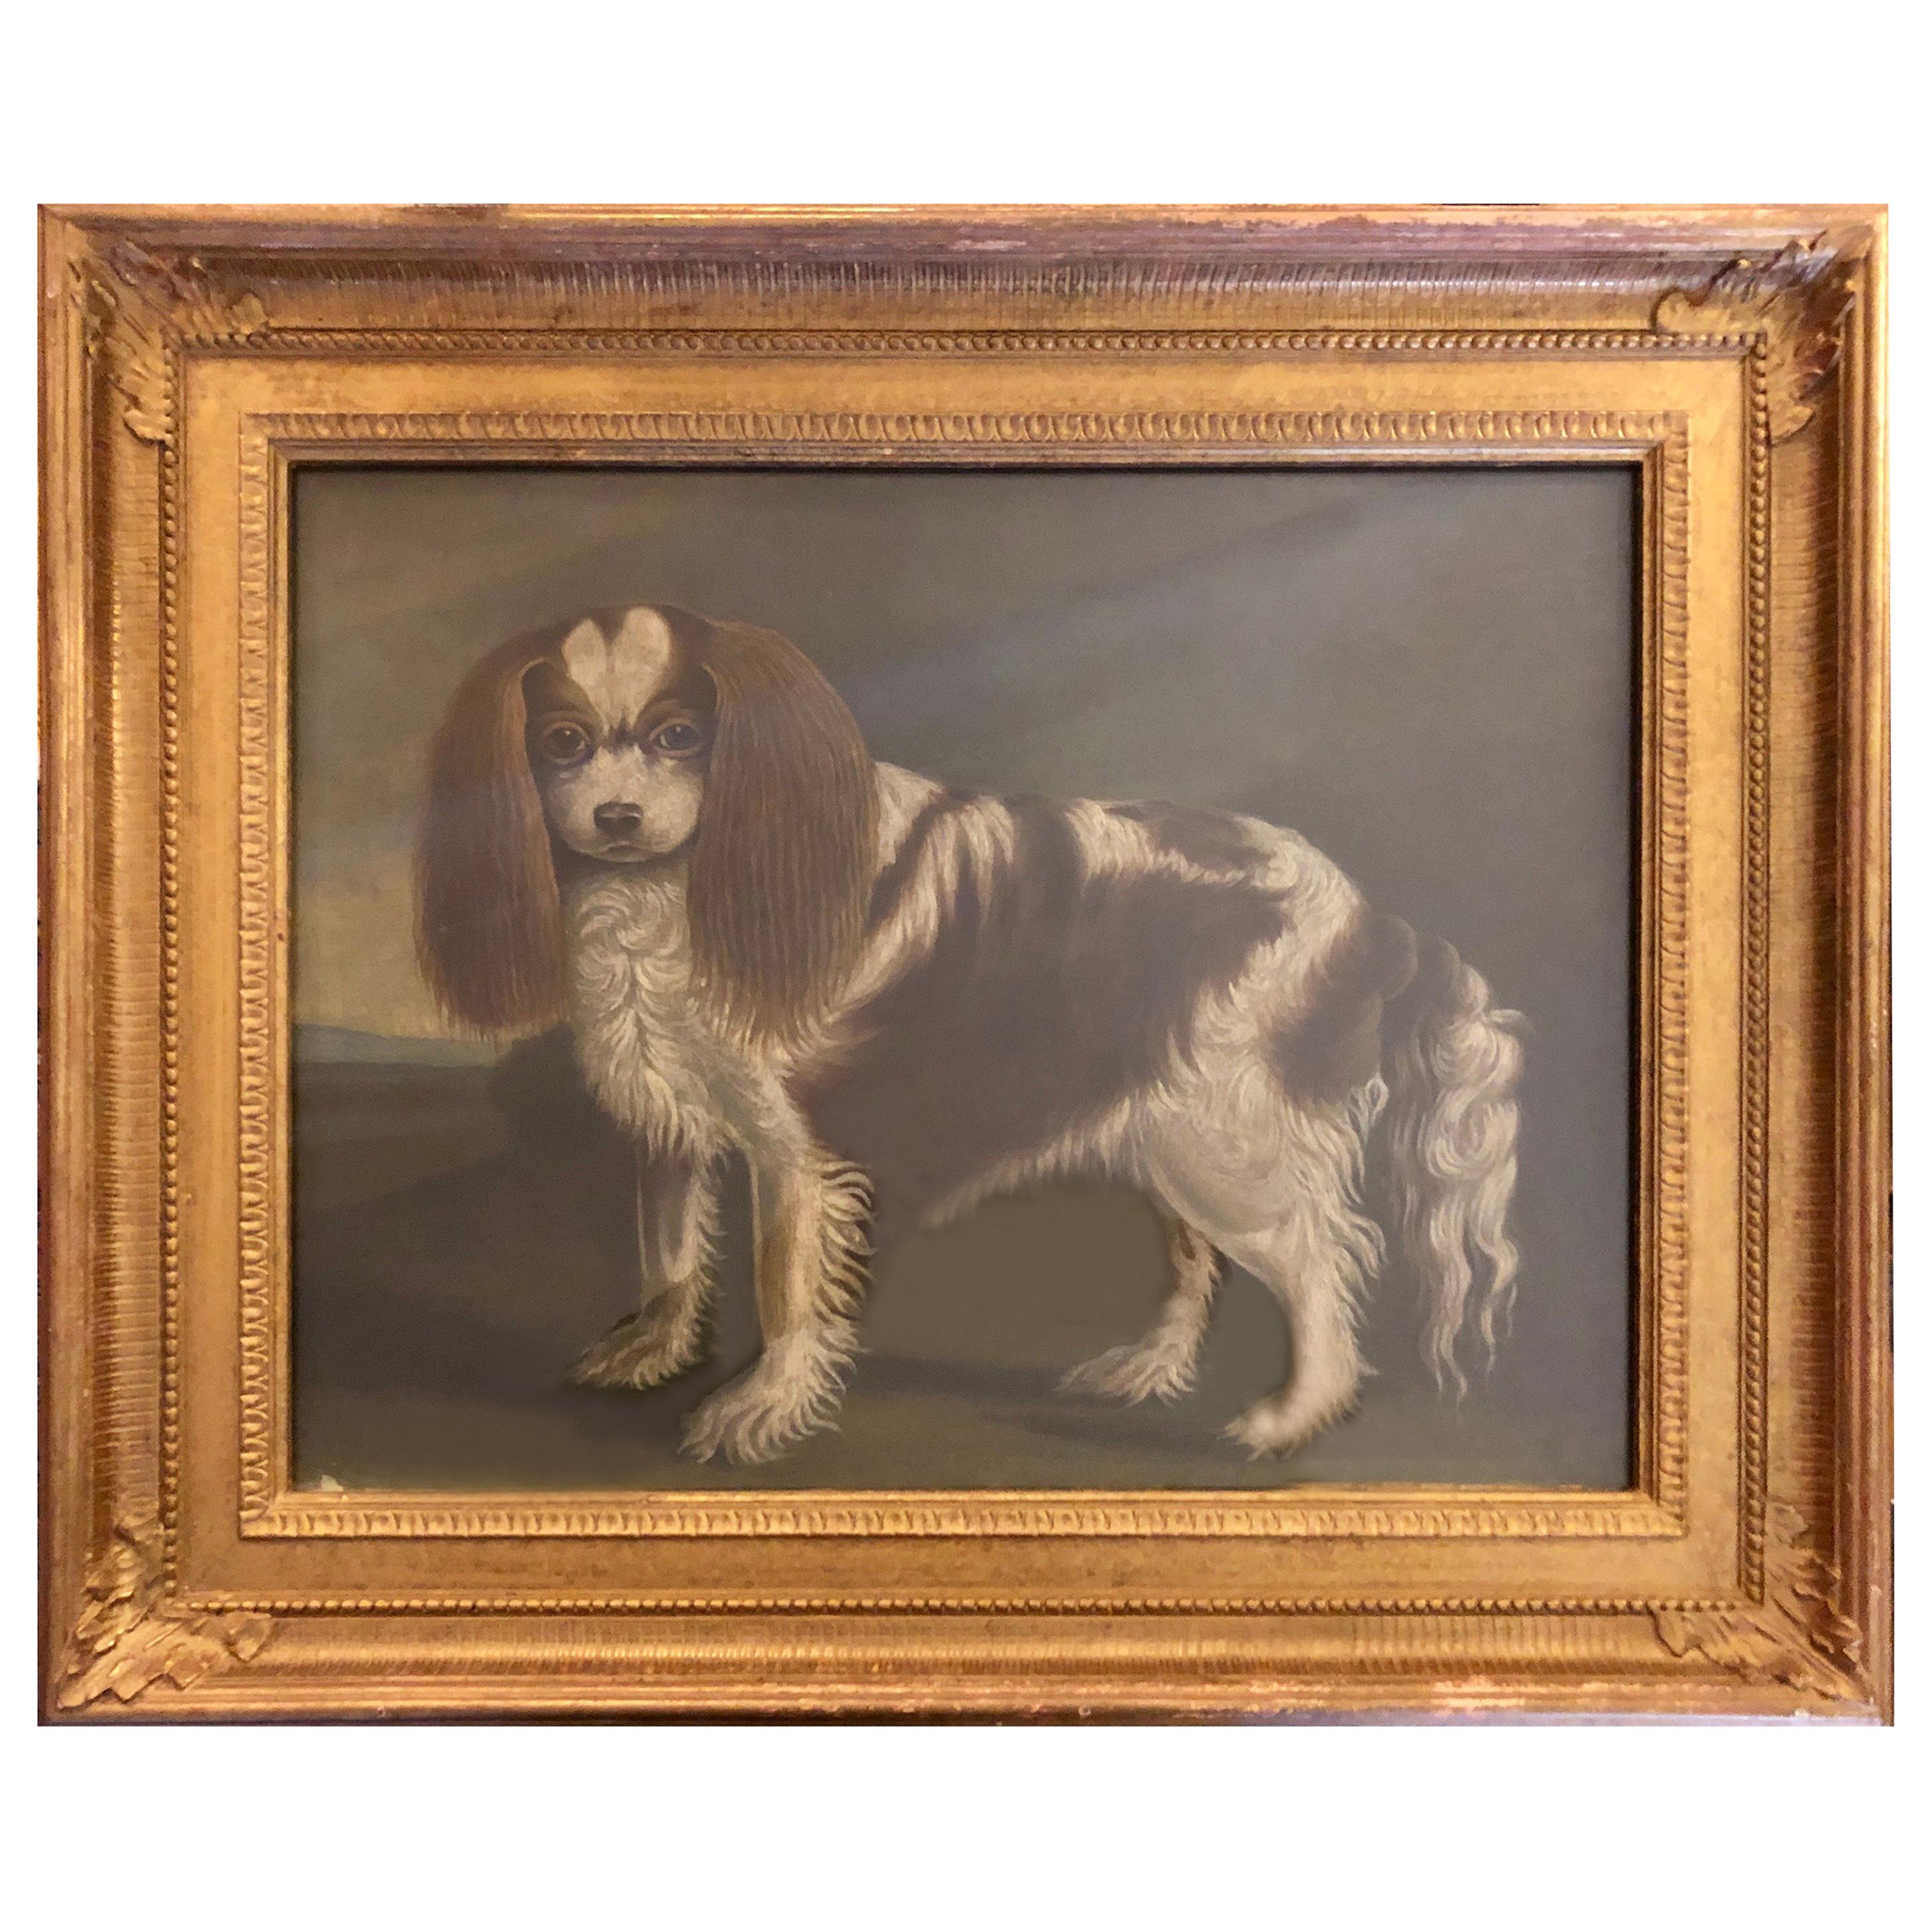 Portrait of a
Cavalier King Charles Spaniel, oil on canvas, 20th Century
